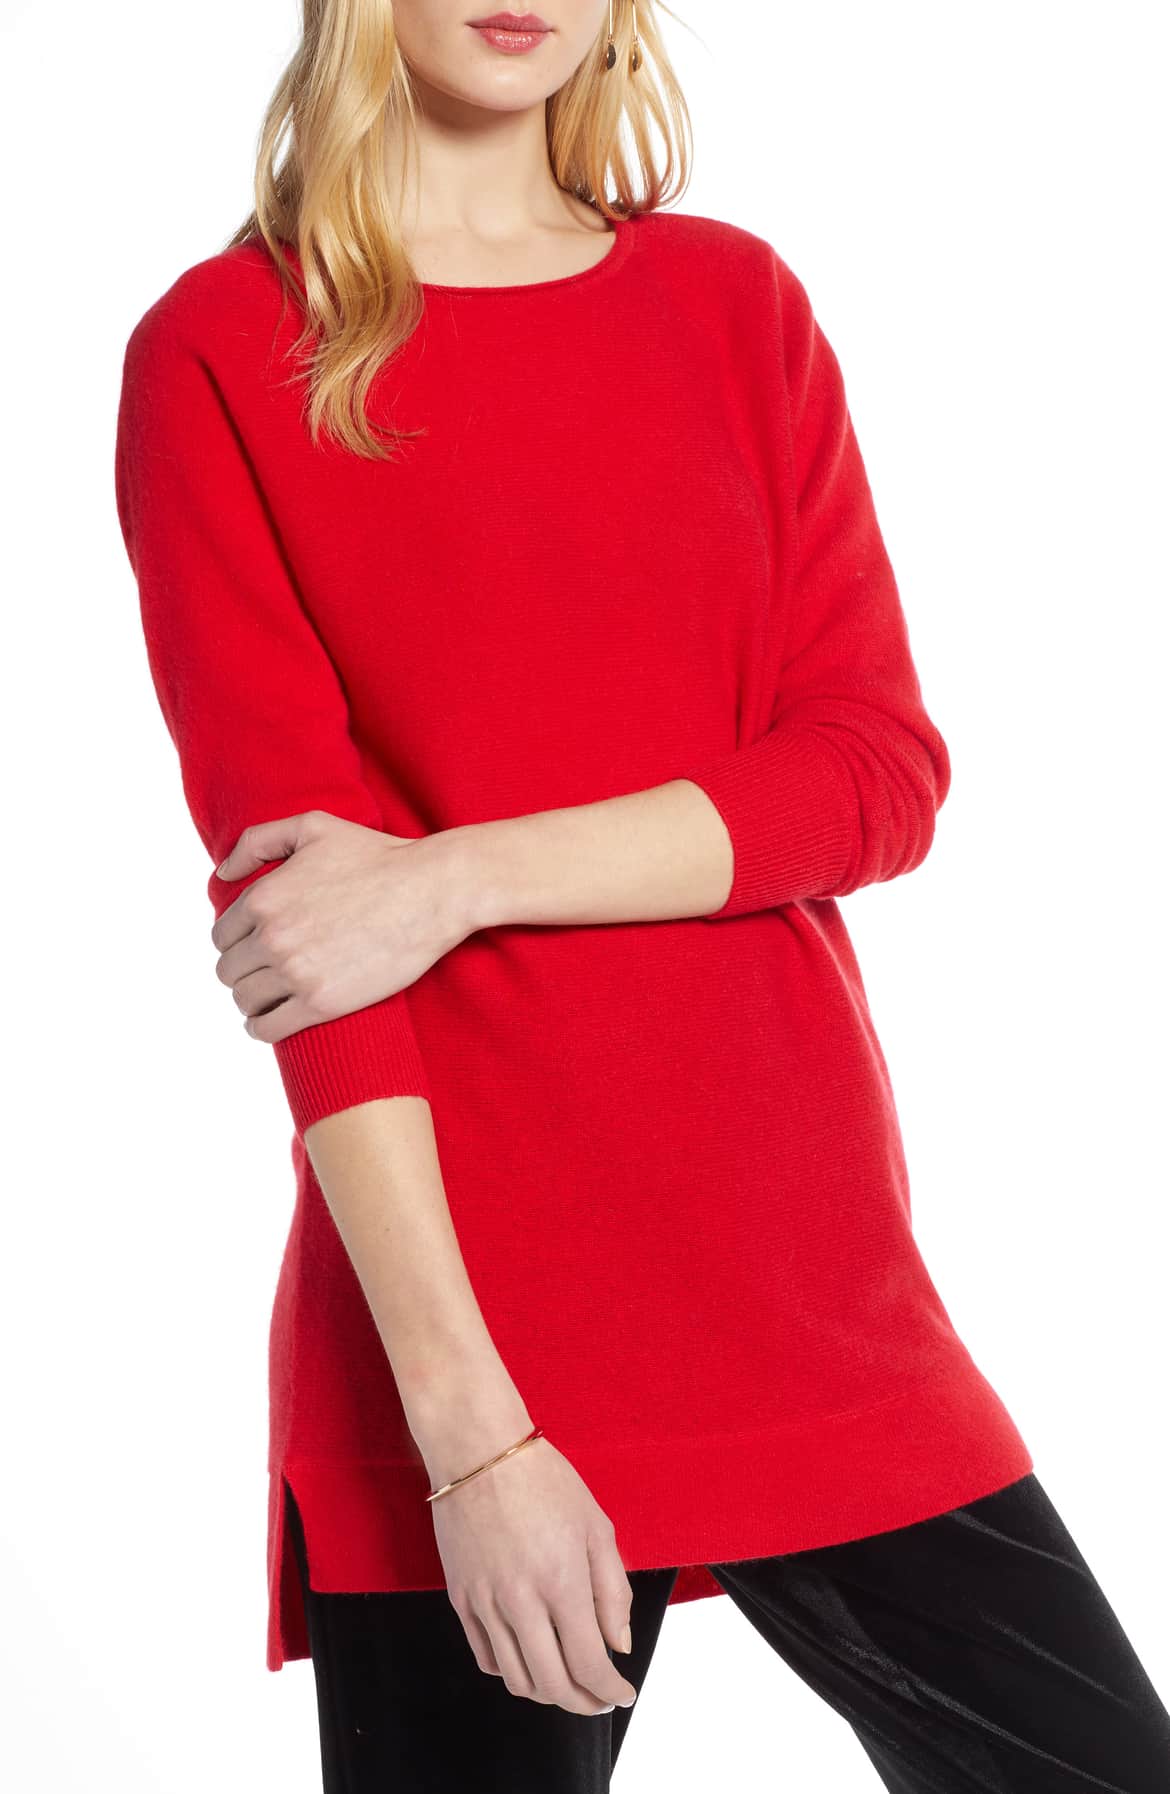 This On-Sale Cashmere Wool Sweater Is a Must-Have for Fall